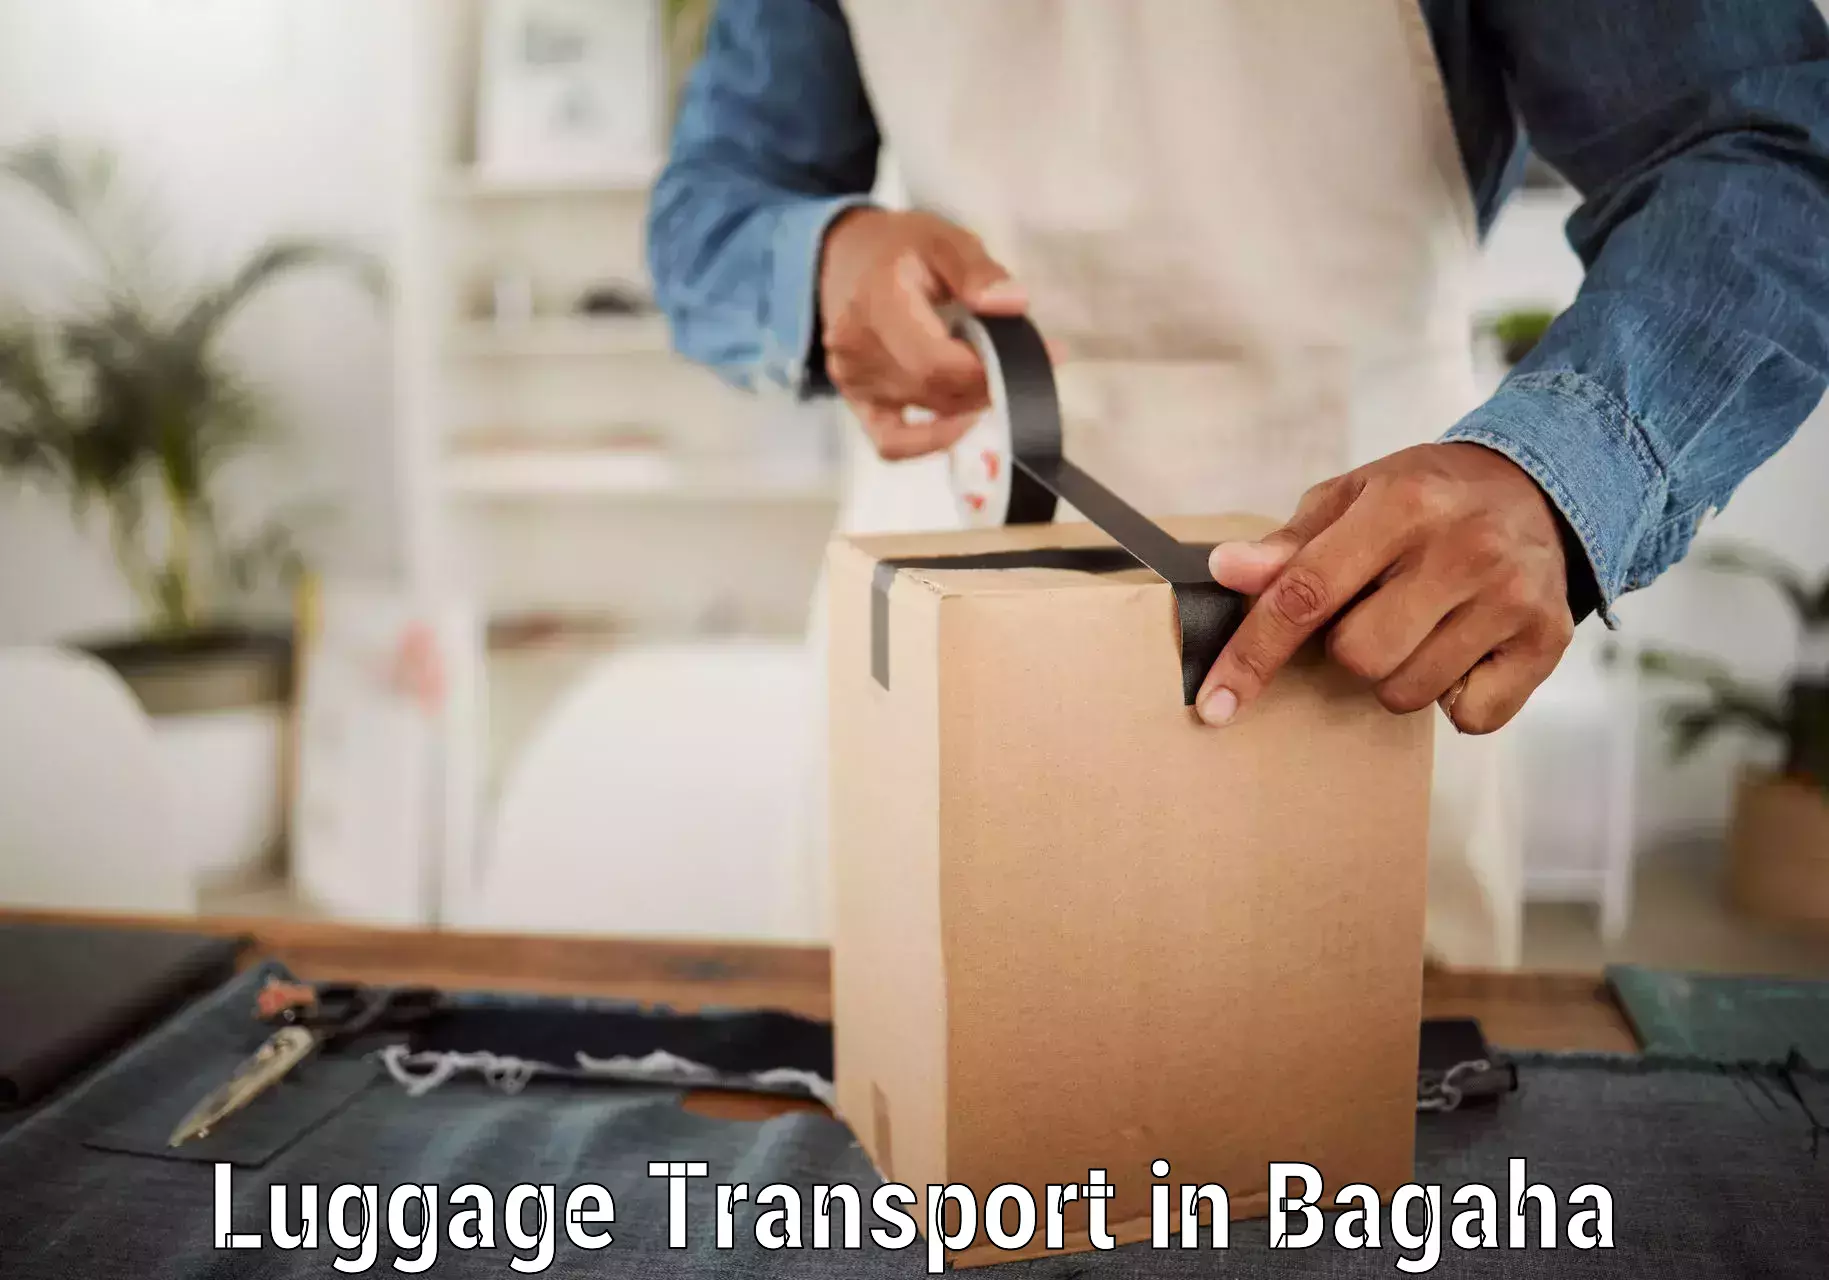 Luggage delivery estimate in Bagaha